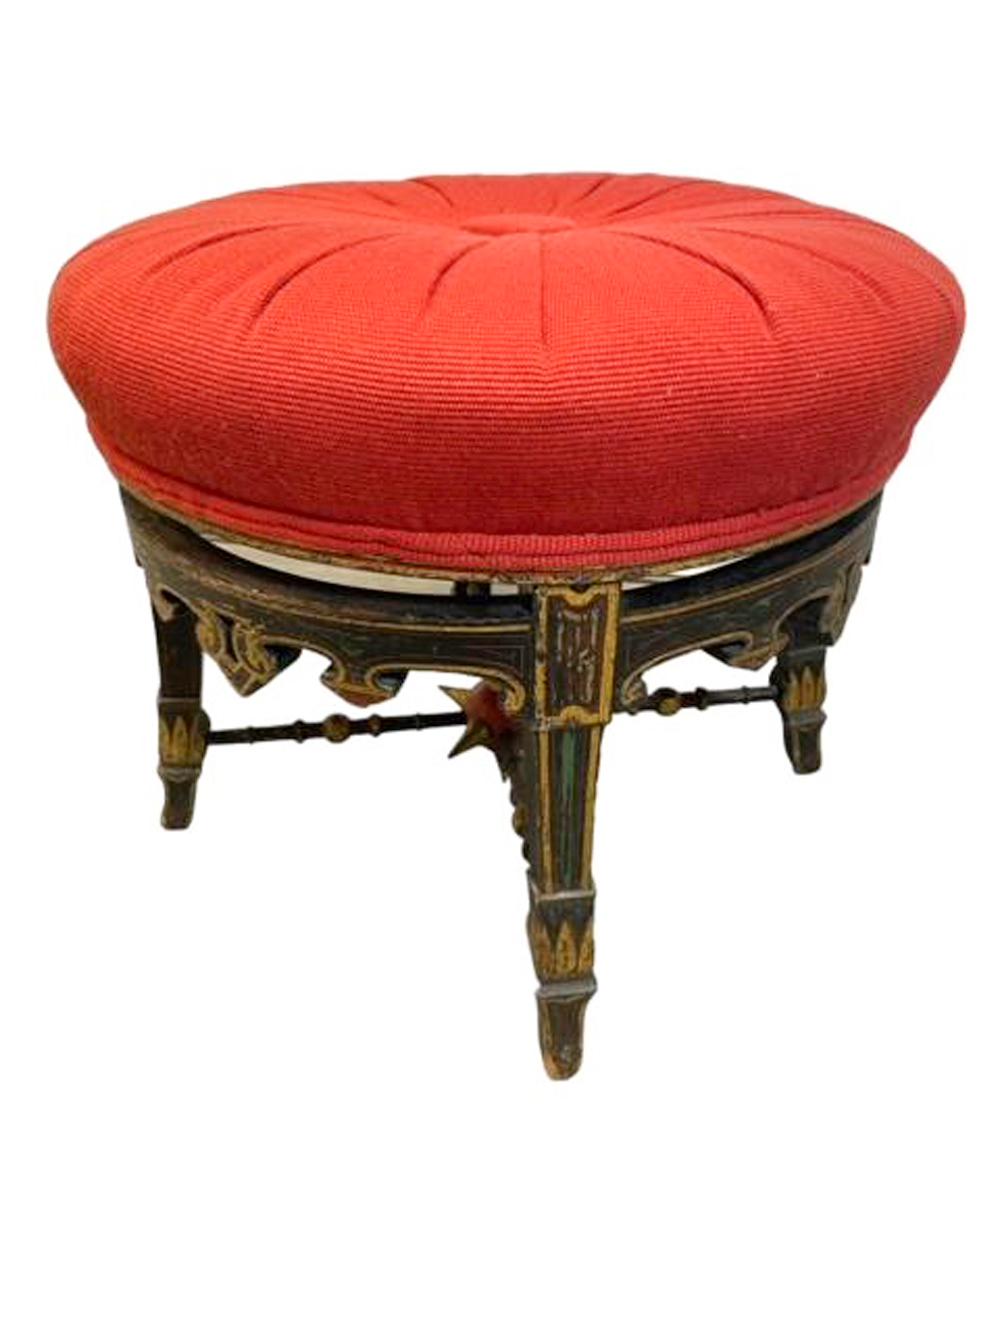 19th Century American Aesthetic Period Grain Painted Stool with Upholstered Seat For Sale 1